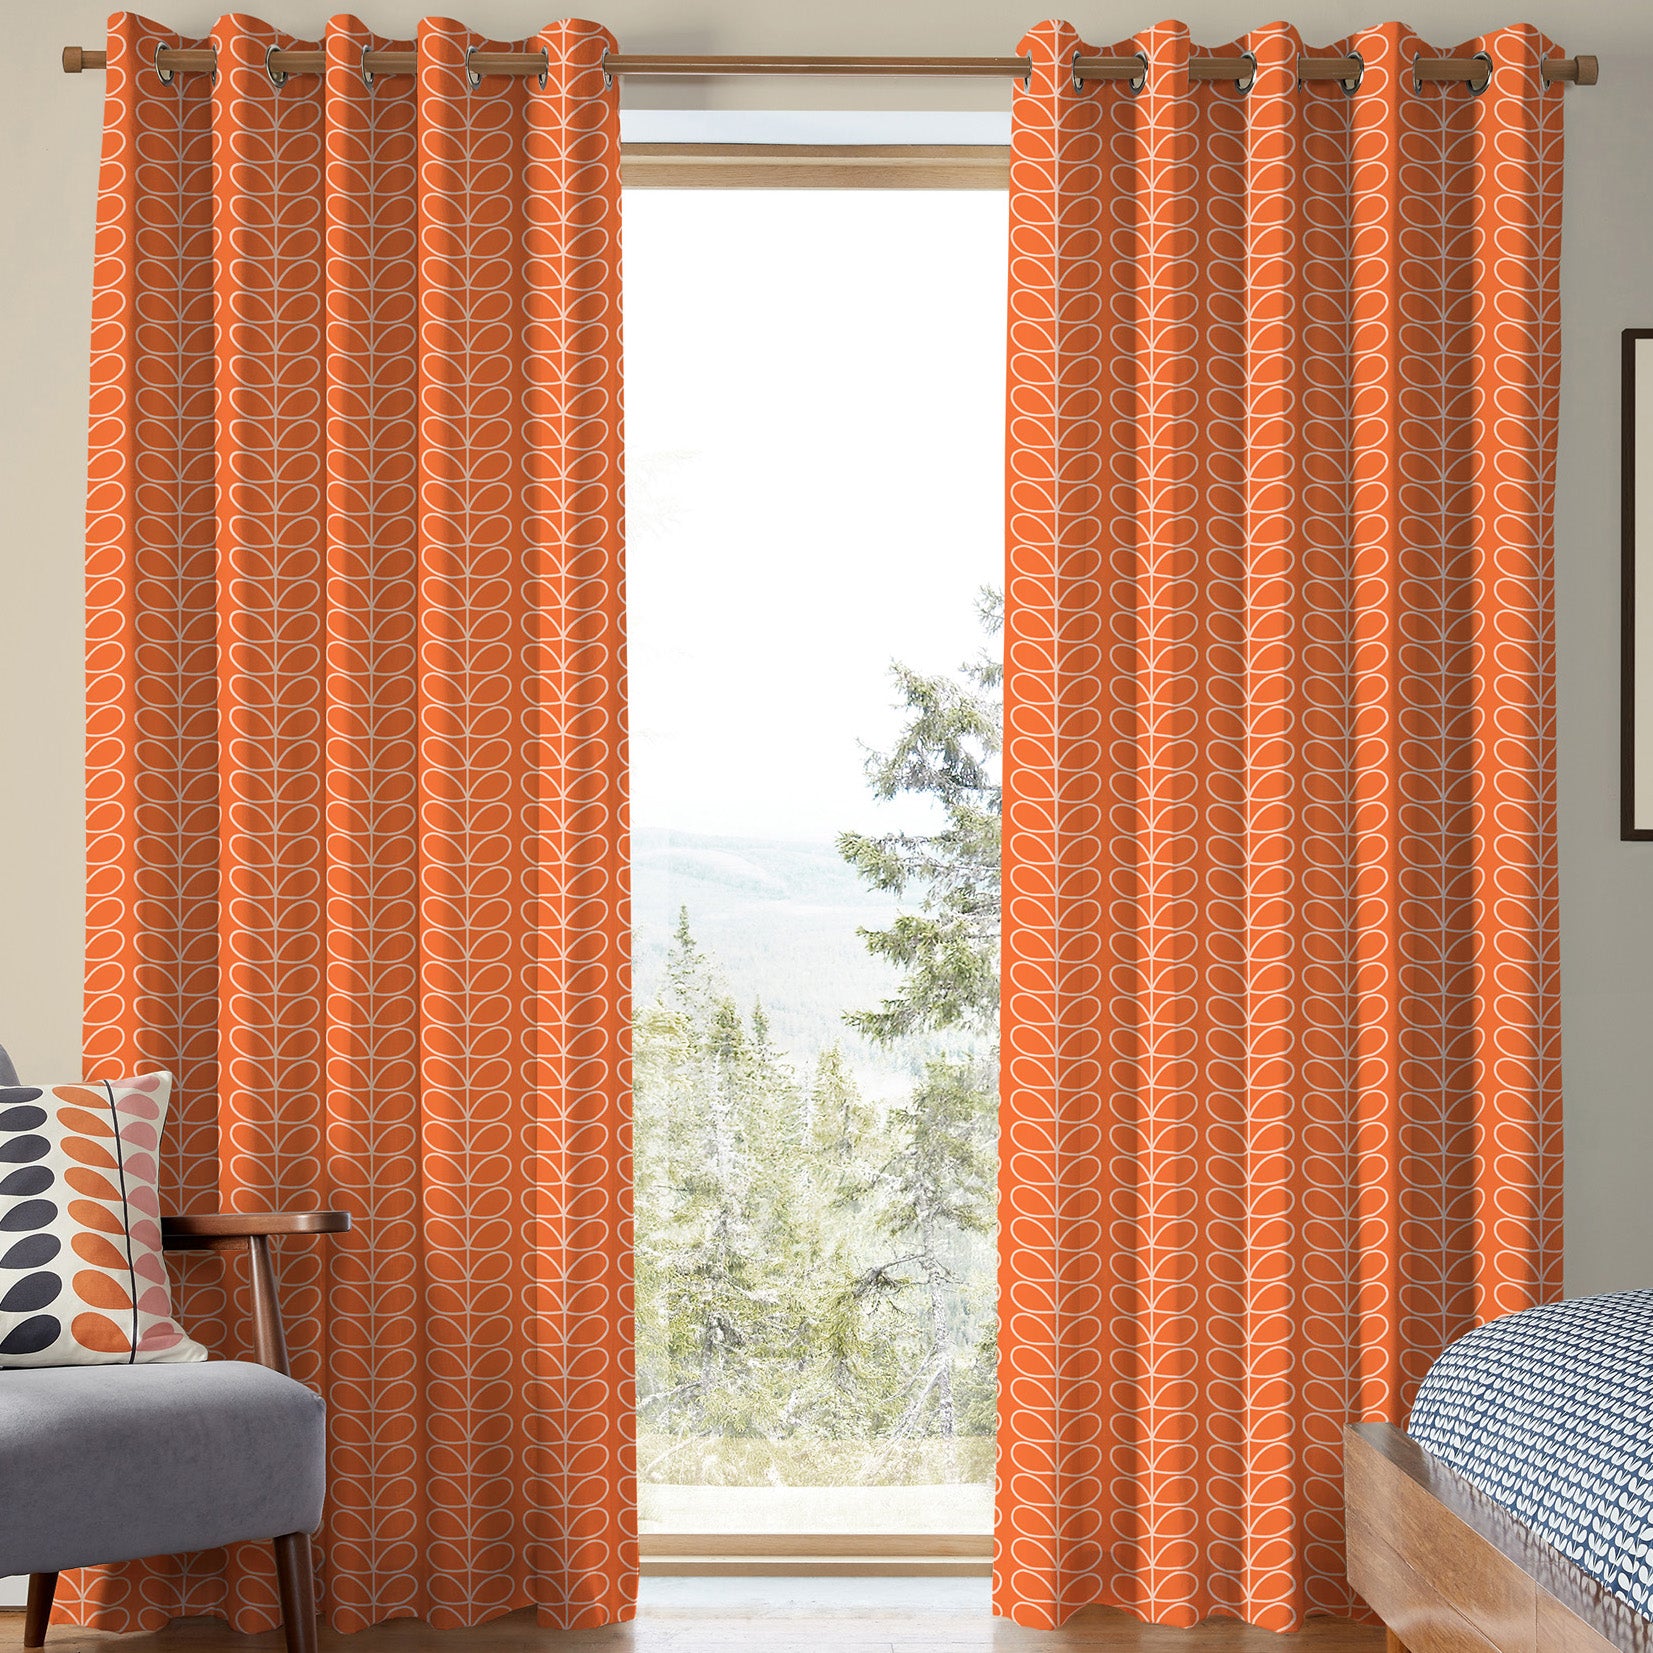 Orla Kiely Linear Stem Made To Measure Curtains Persimmon